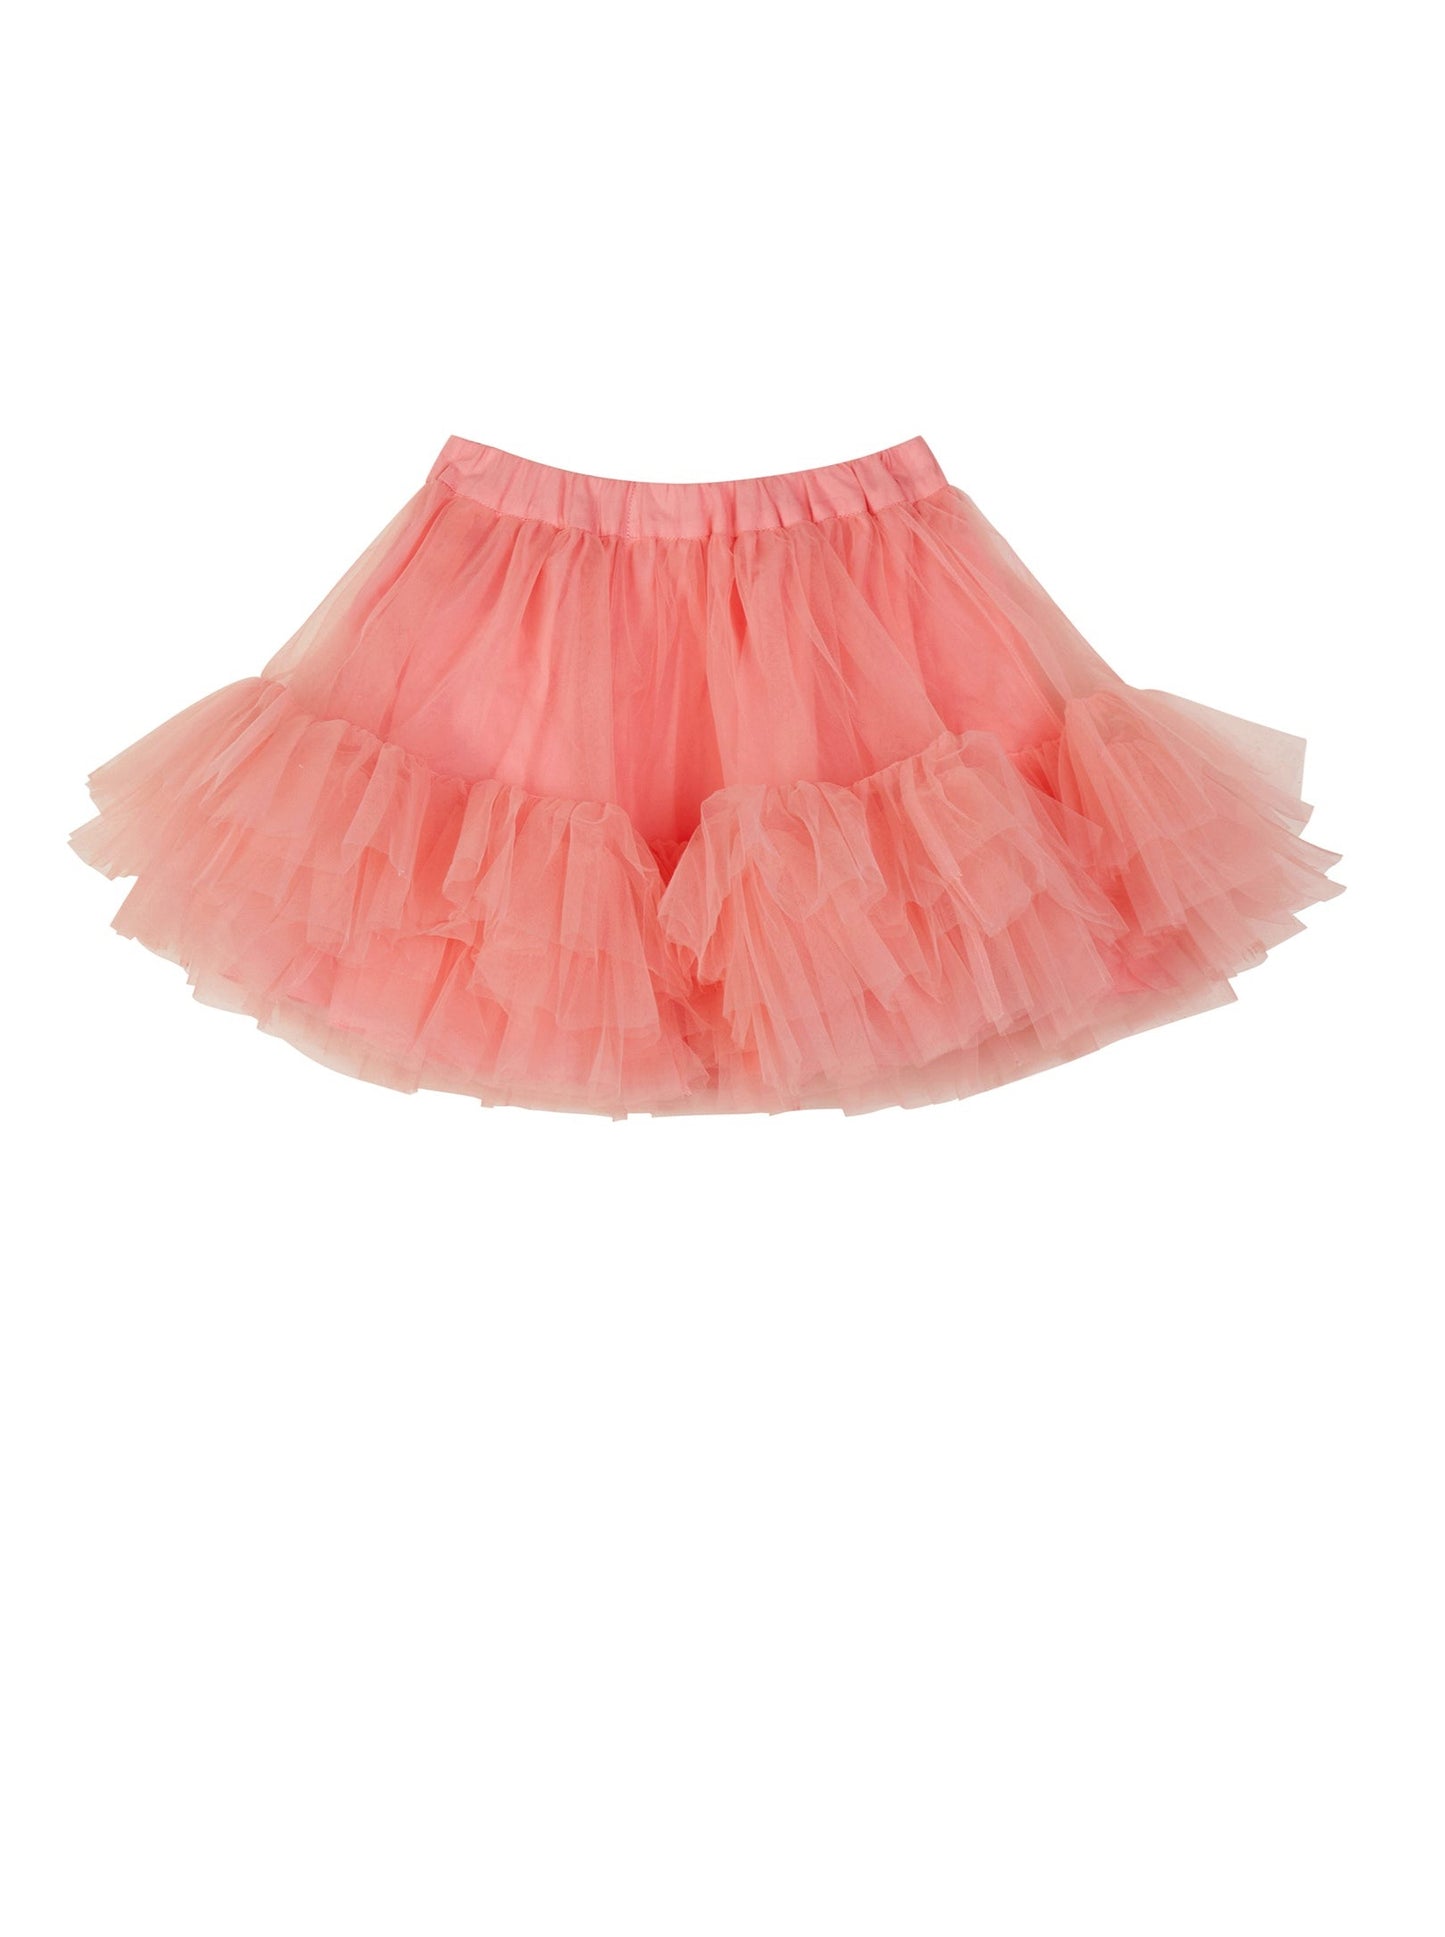 bright pink tulle skirt.  Skirt is to the knee with an elasticated waist. 